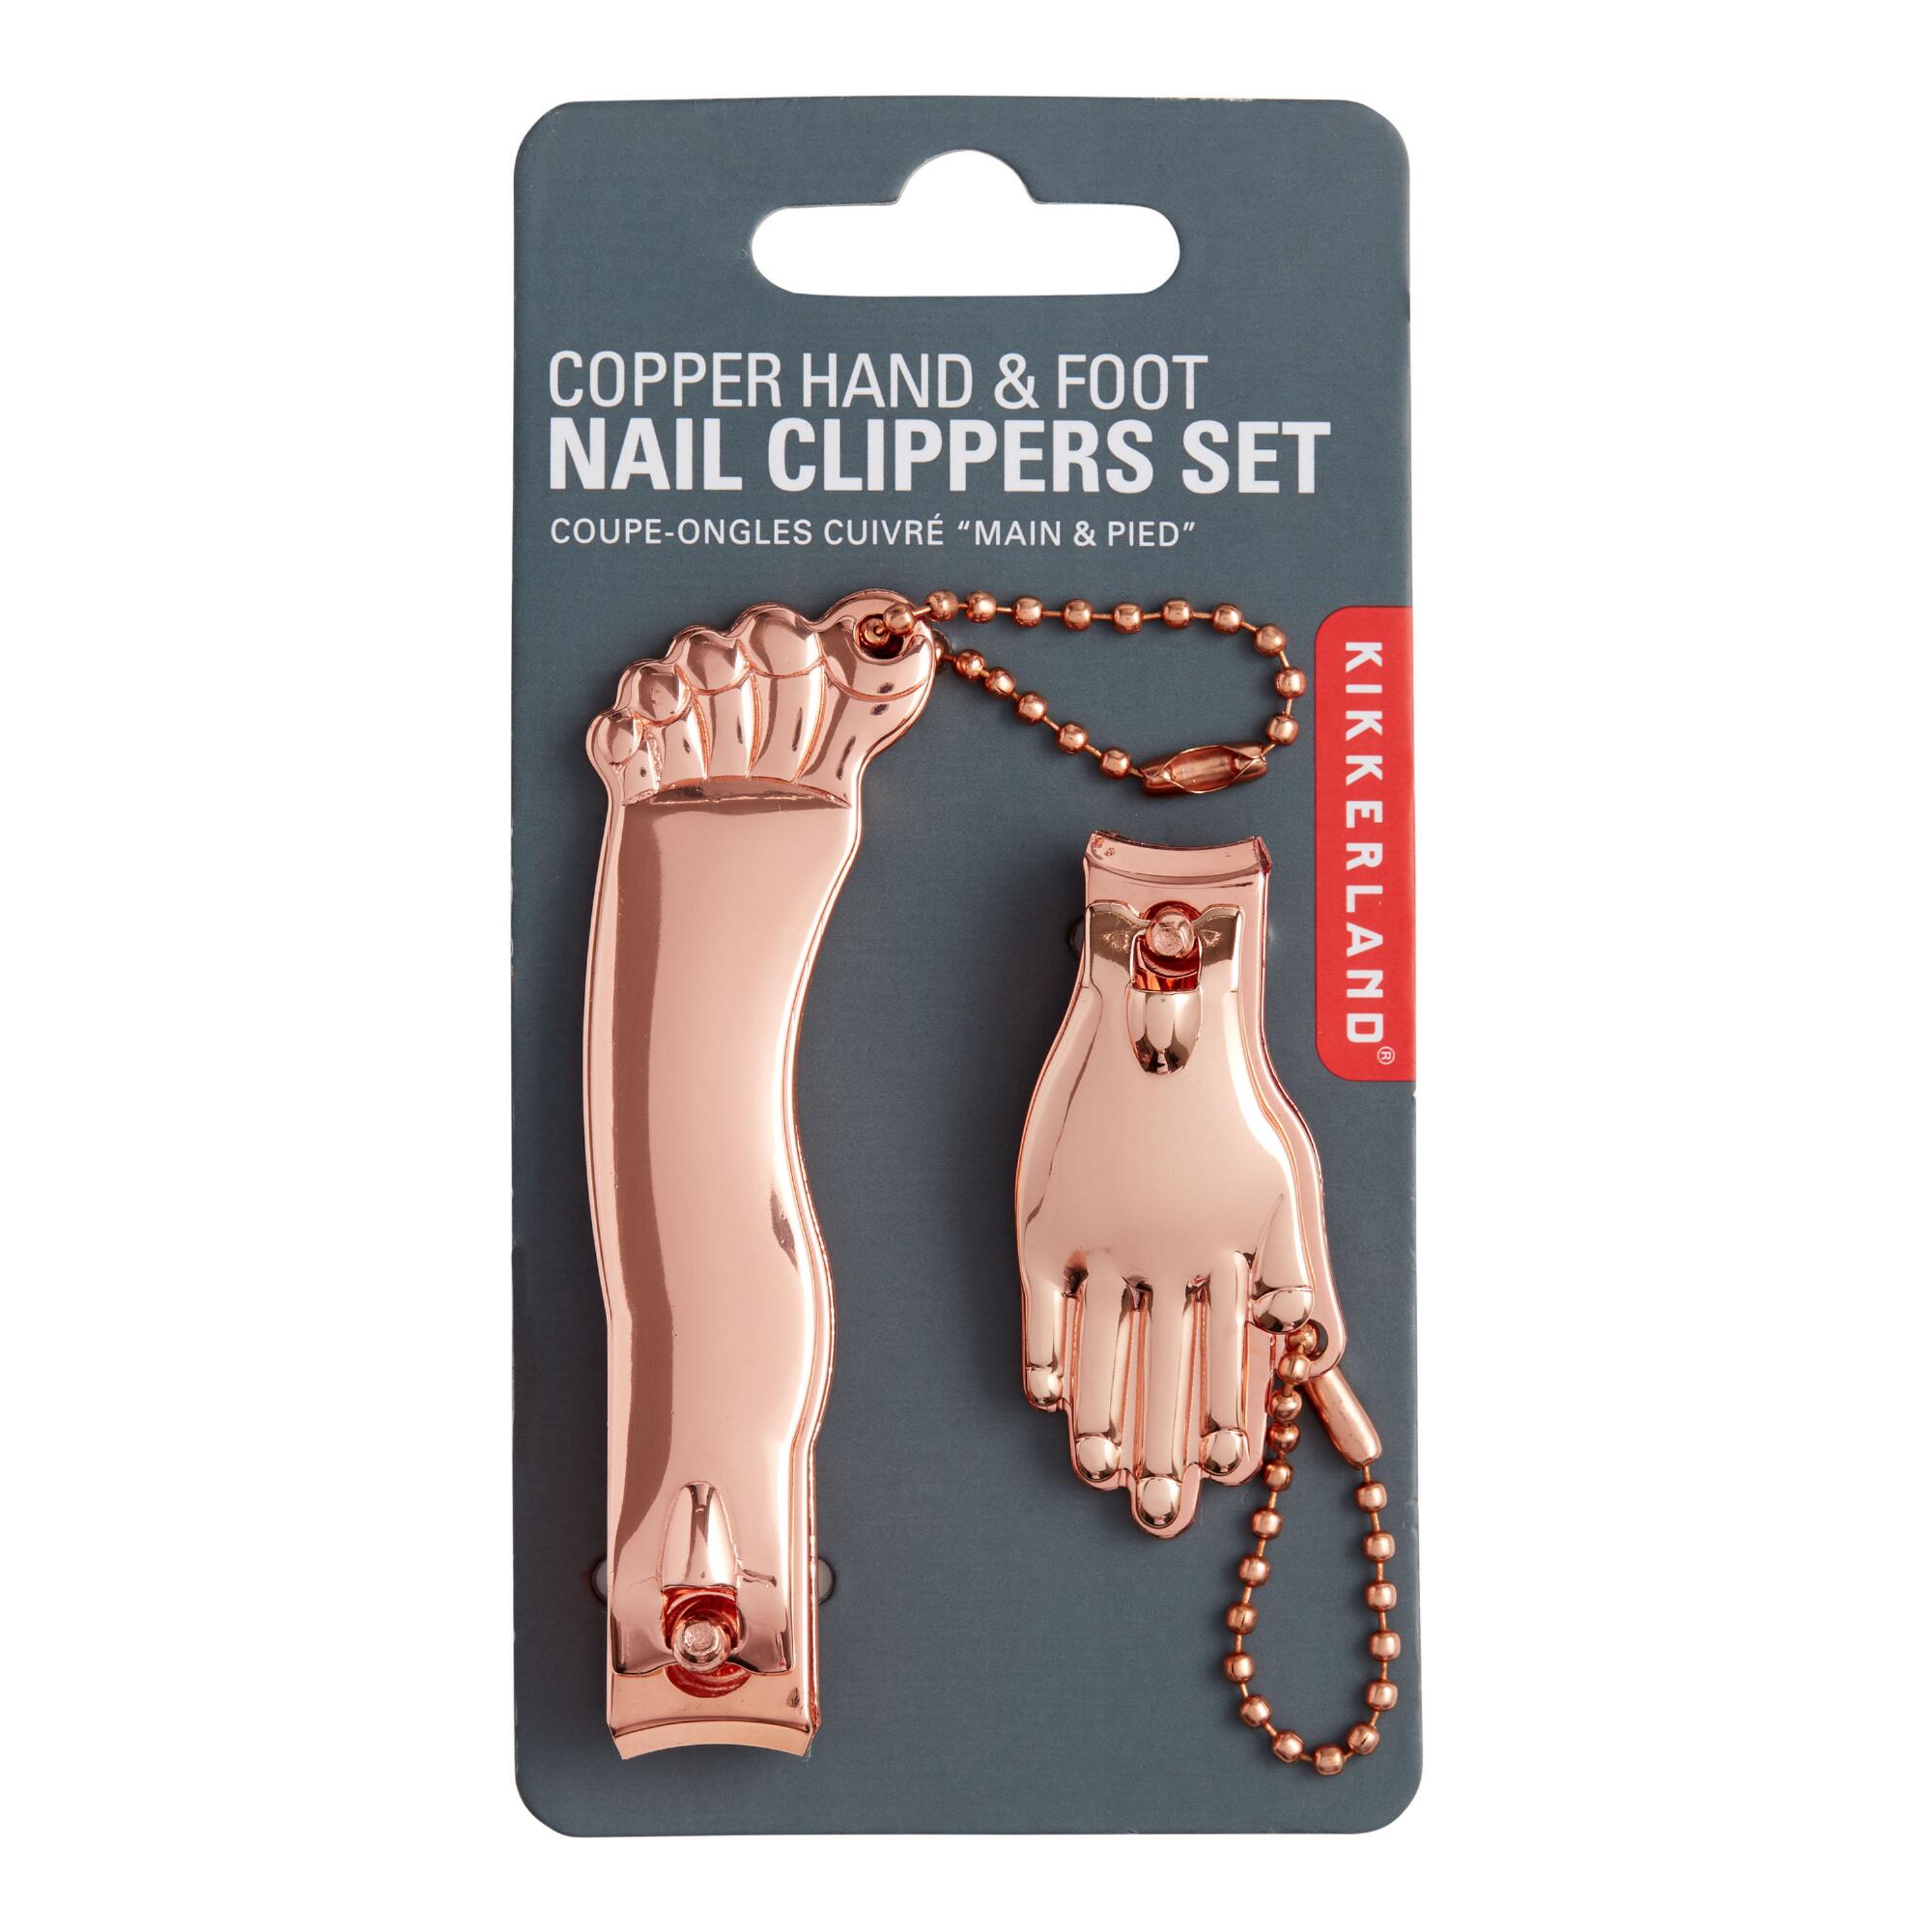 Kikkerland Silver Hand & Foot Shaped Nail Clippers Set: Gold - Metal by World Market